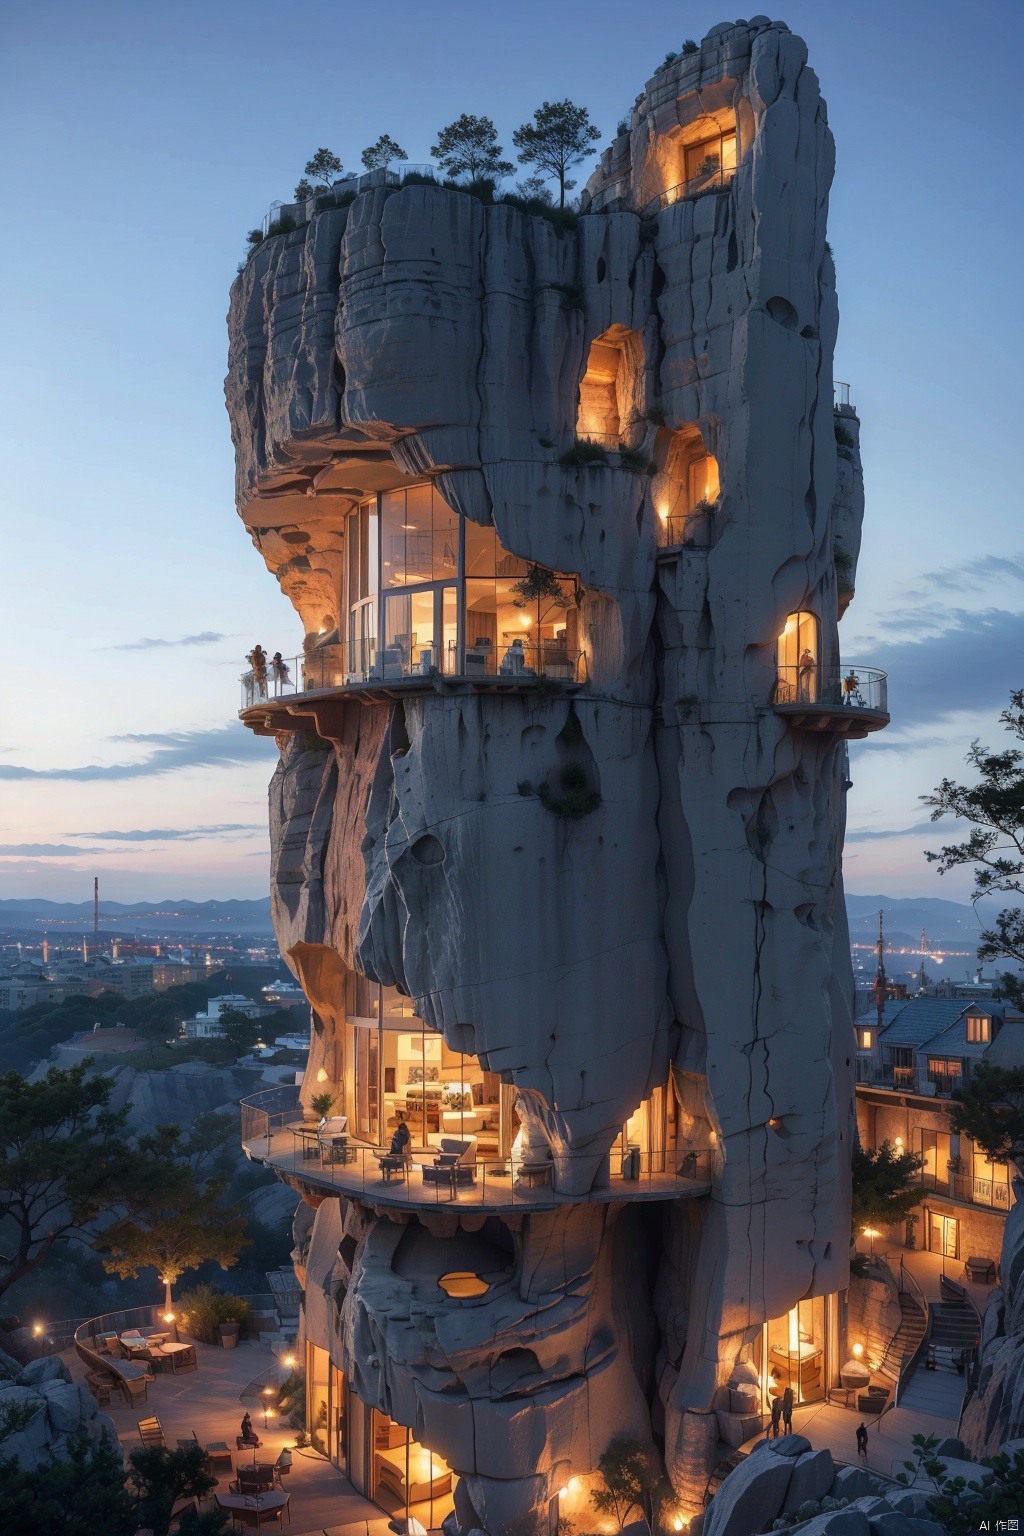 Architectural rendering, architectural design, Rock architecture, Rock buildings, sky, day, tree, blue sky, no humans, scenery, building, lighting, balcony, French window, room, city